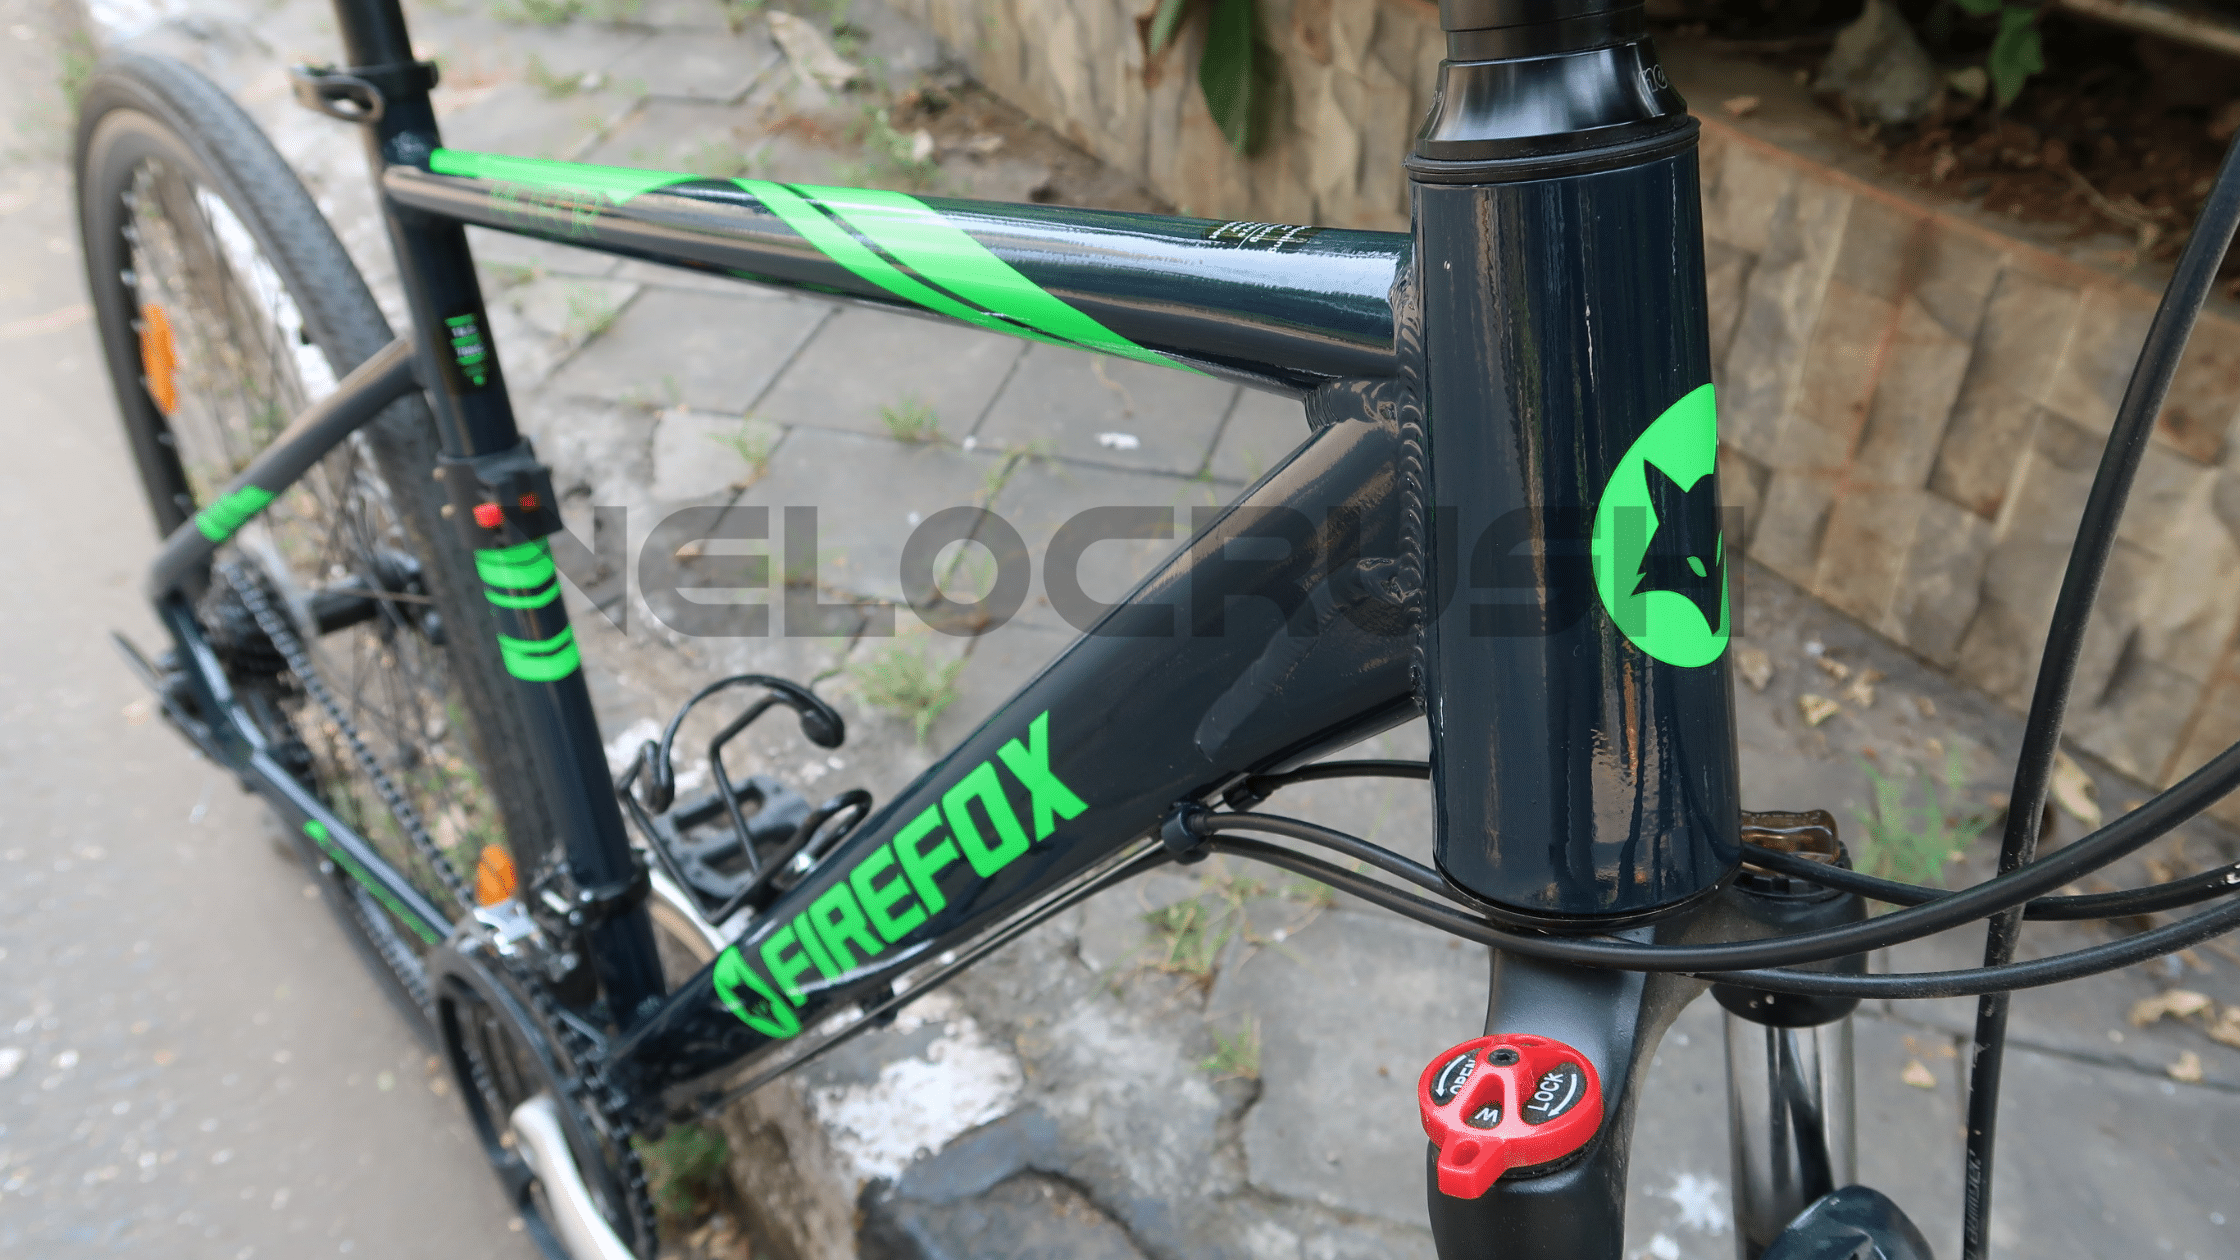 Firefox Bikes - With a stylish performance alloy frame and